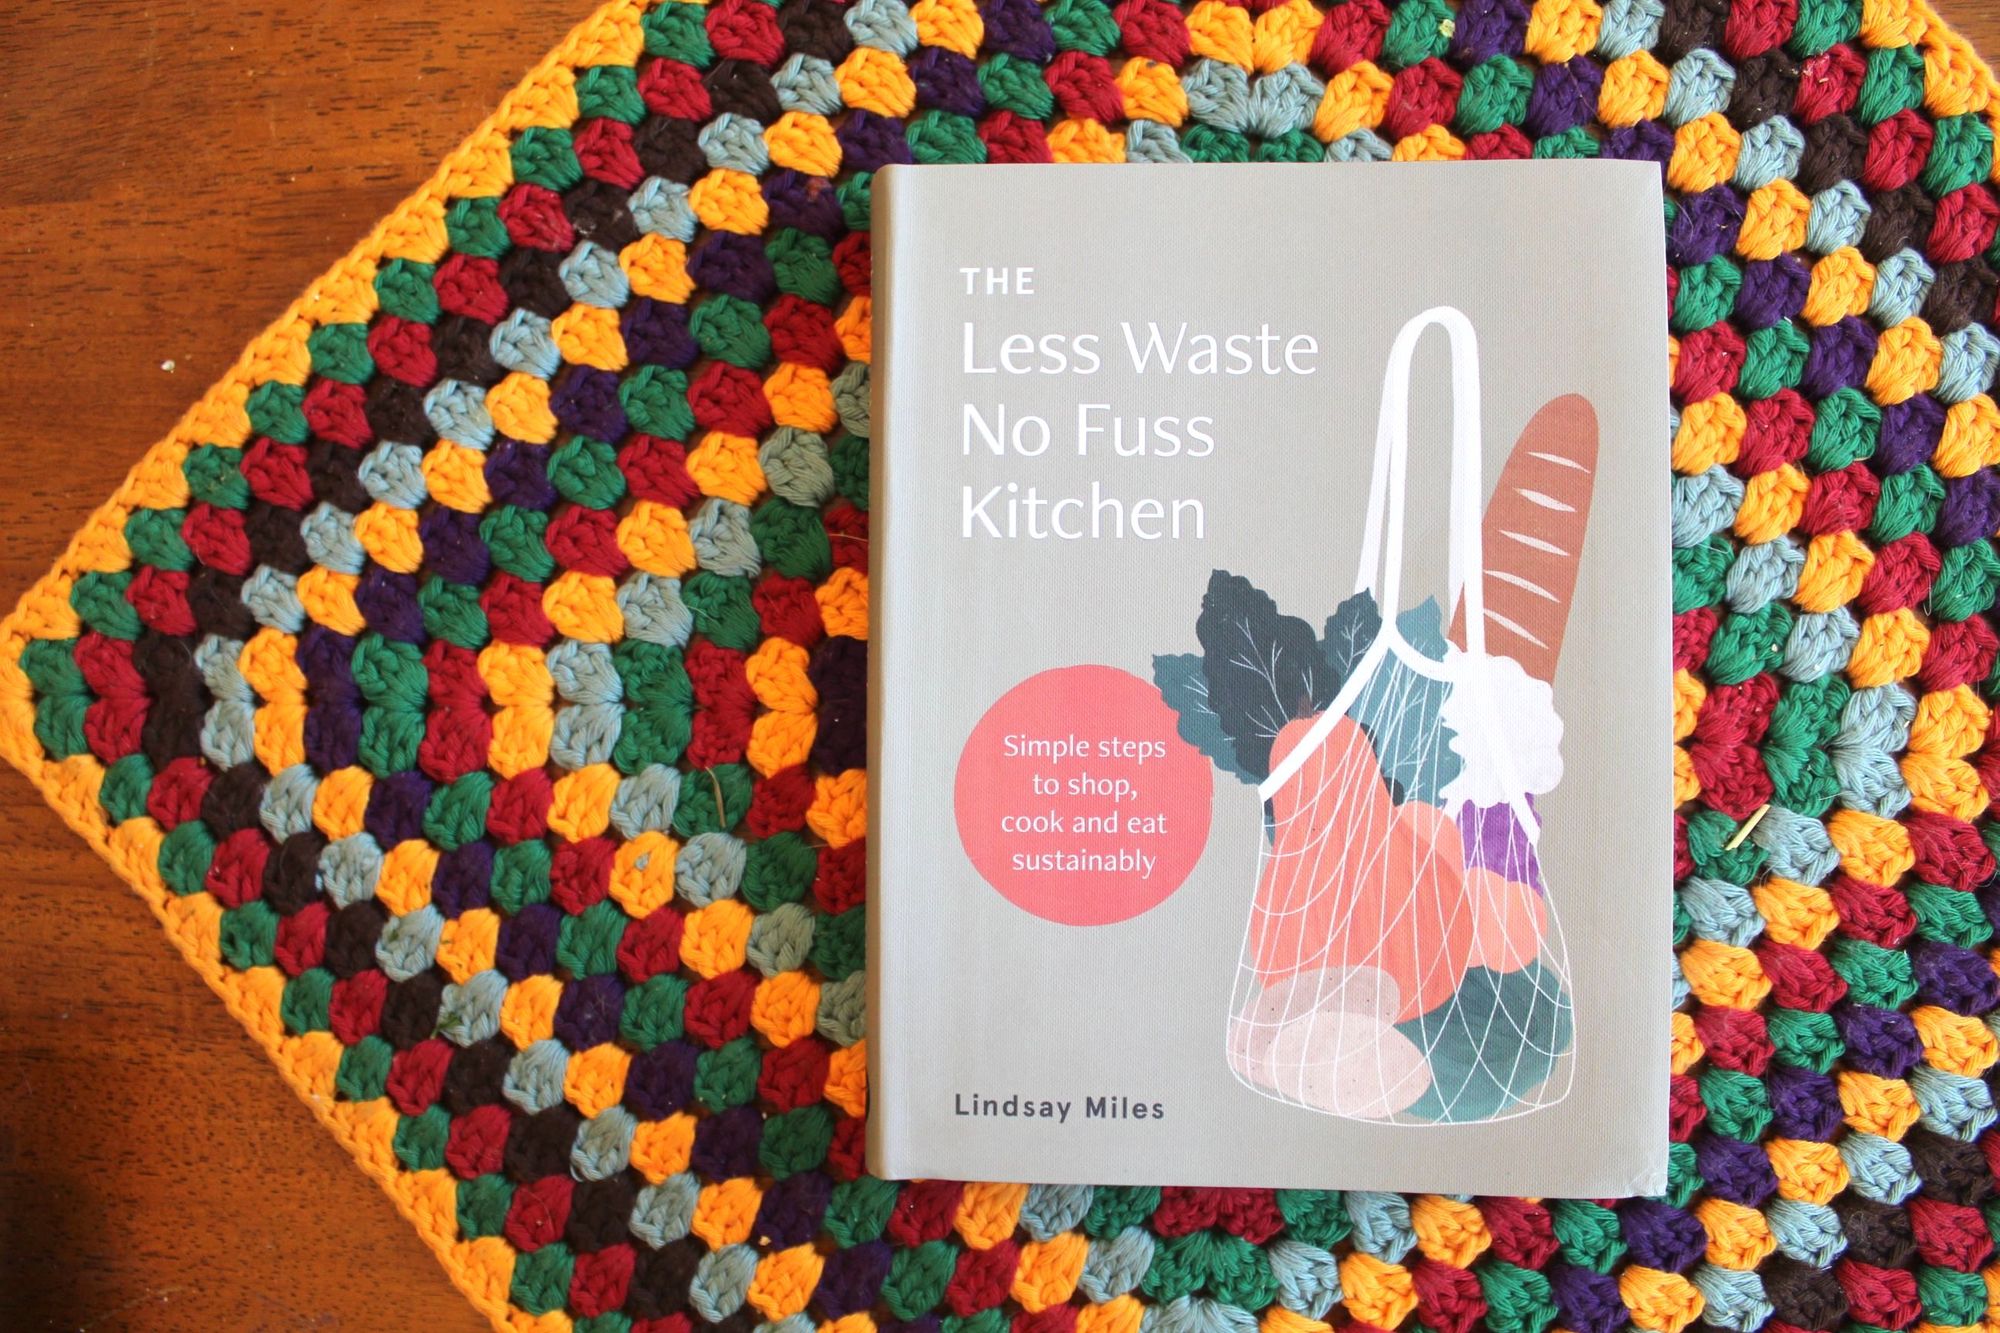 Lindsay Miles' book 'The Less Waste, No Fuss Kitchen'.